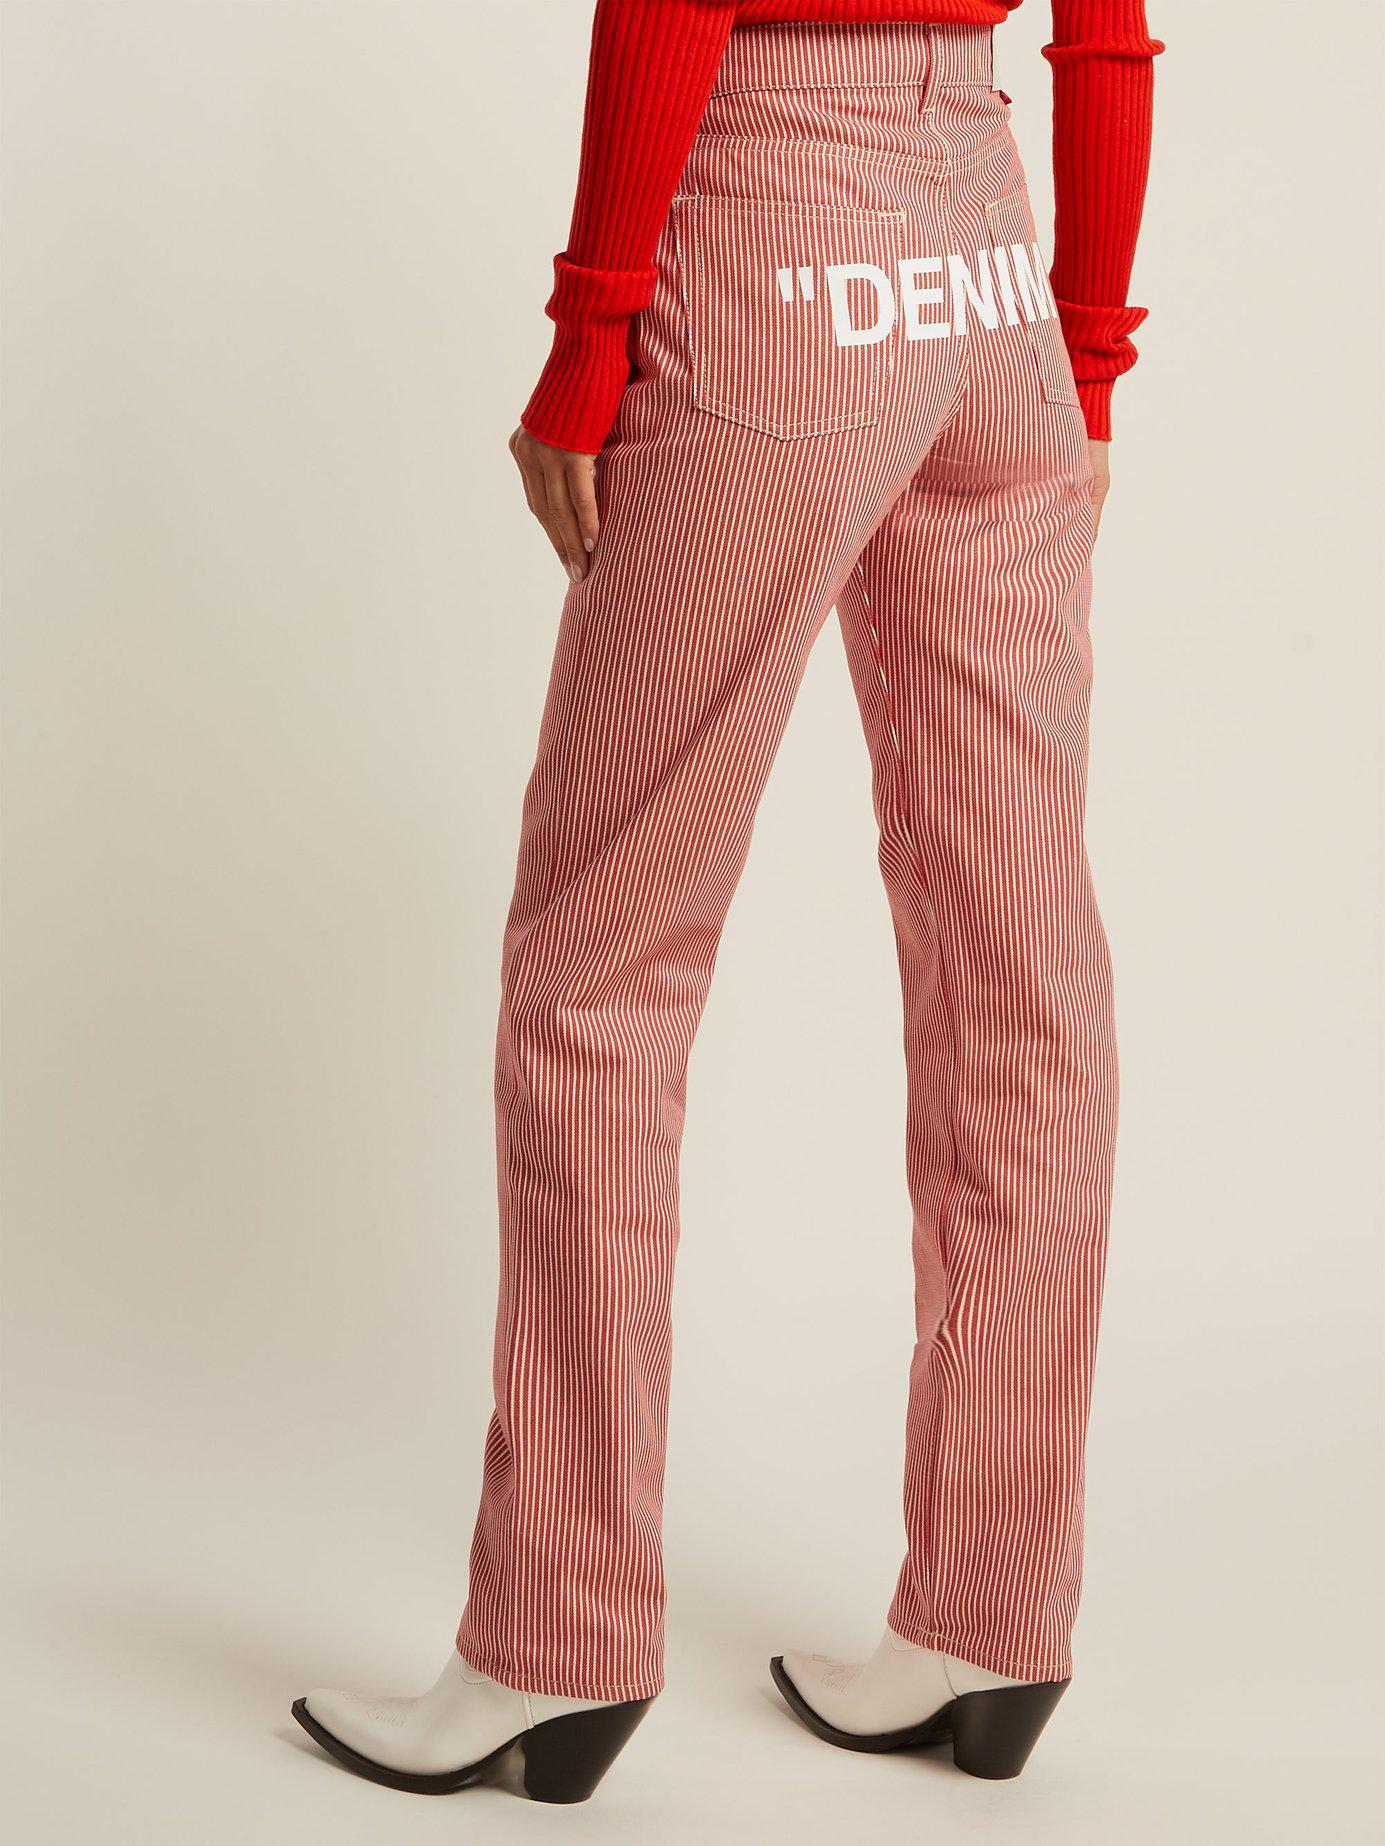 Off-White c/o Virgil Abloh Striped High Rise Straight Leg Jeans in Red |  Lyst